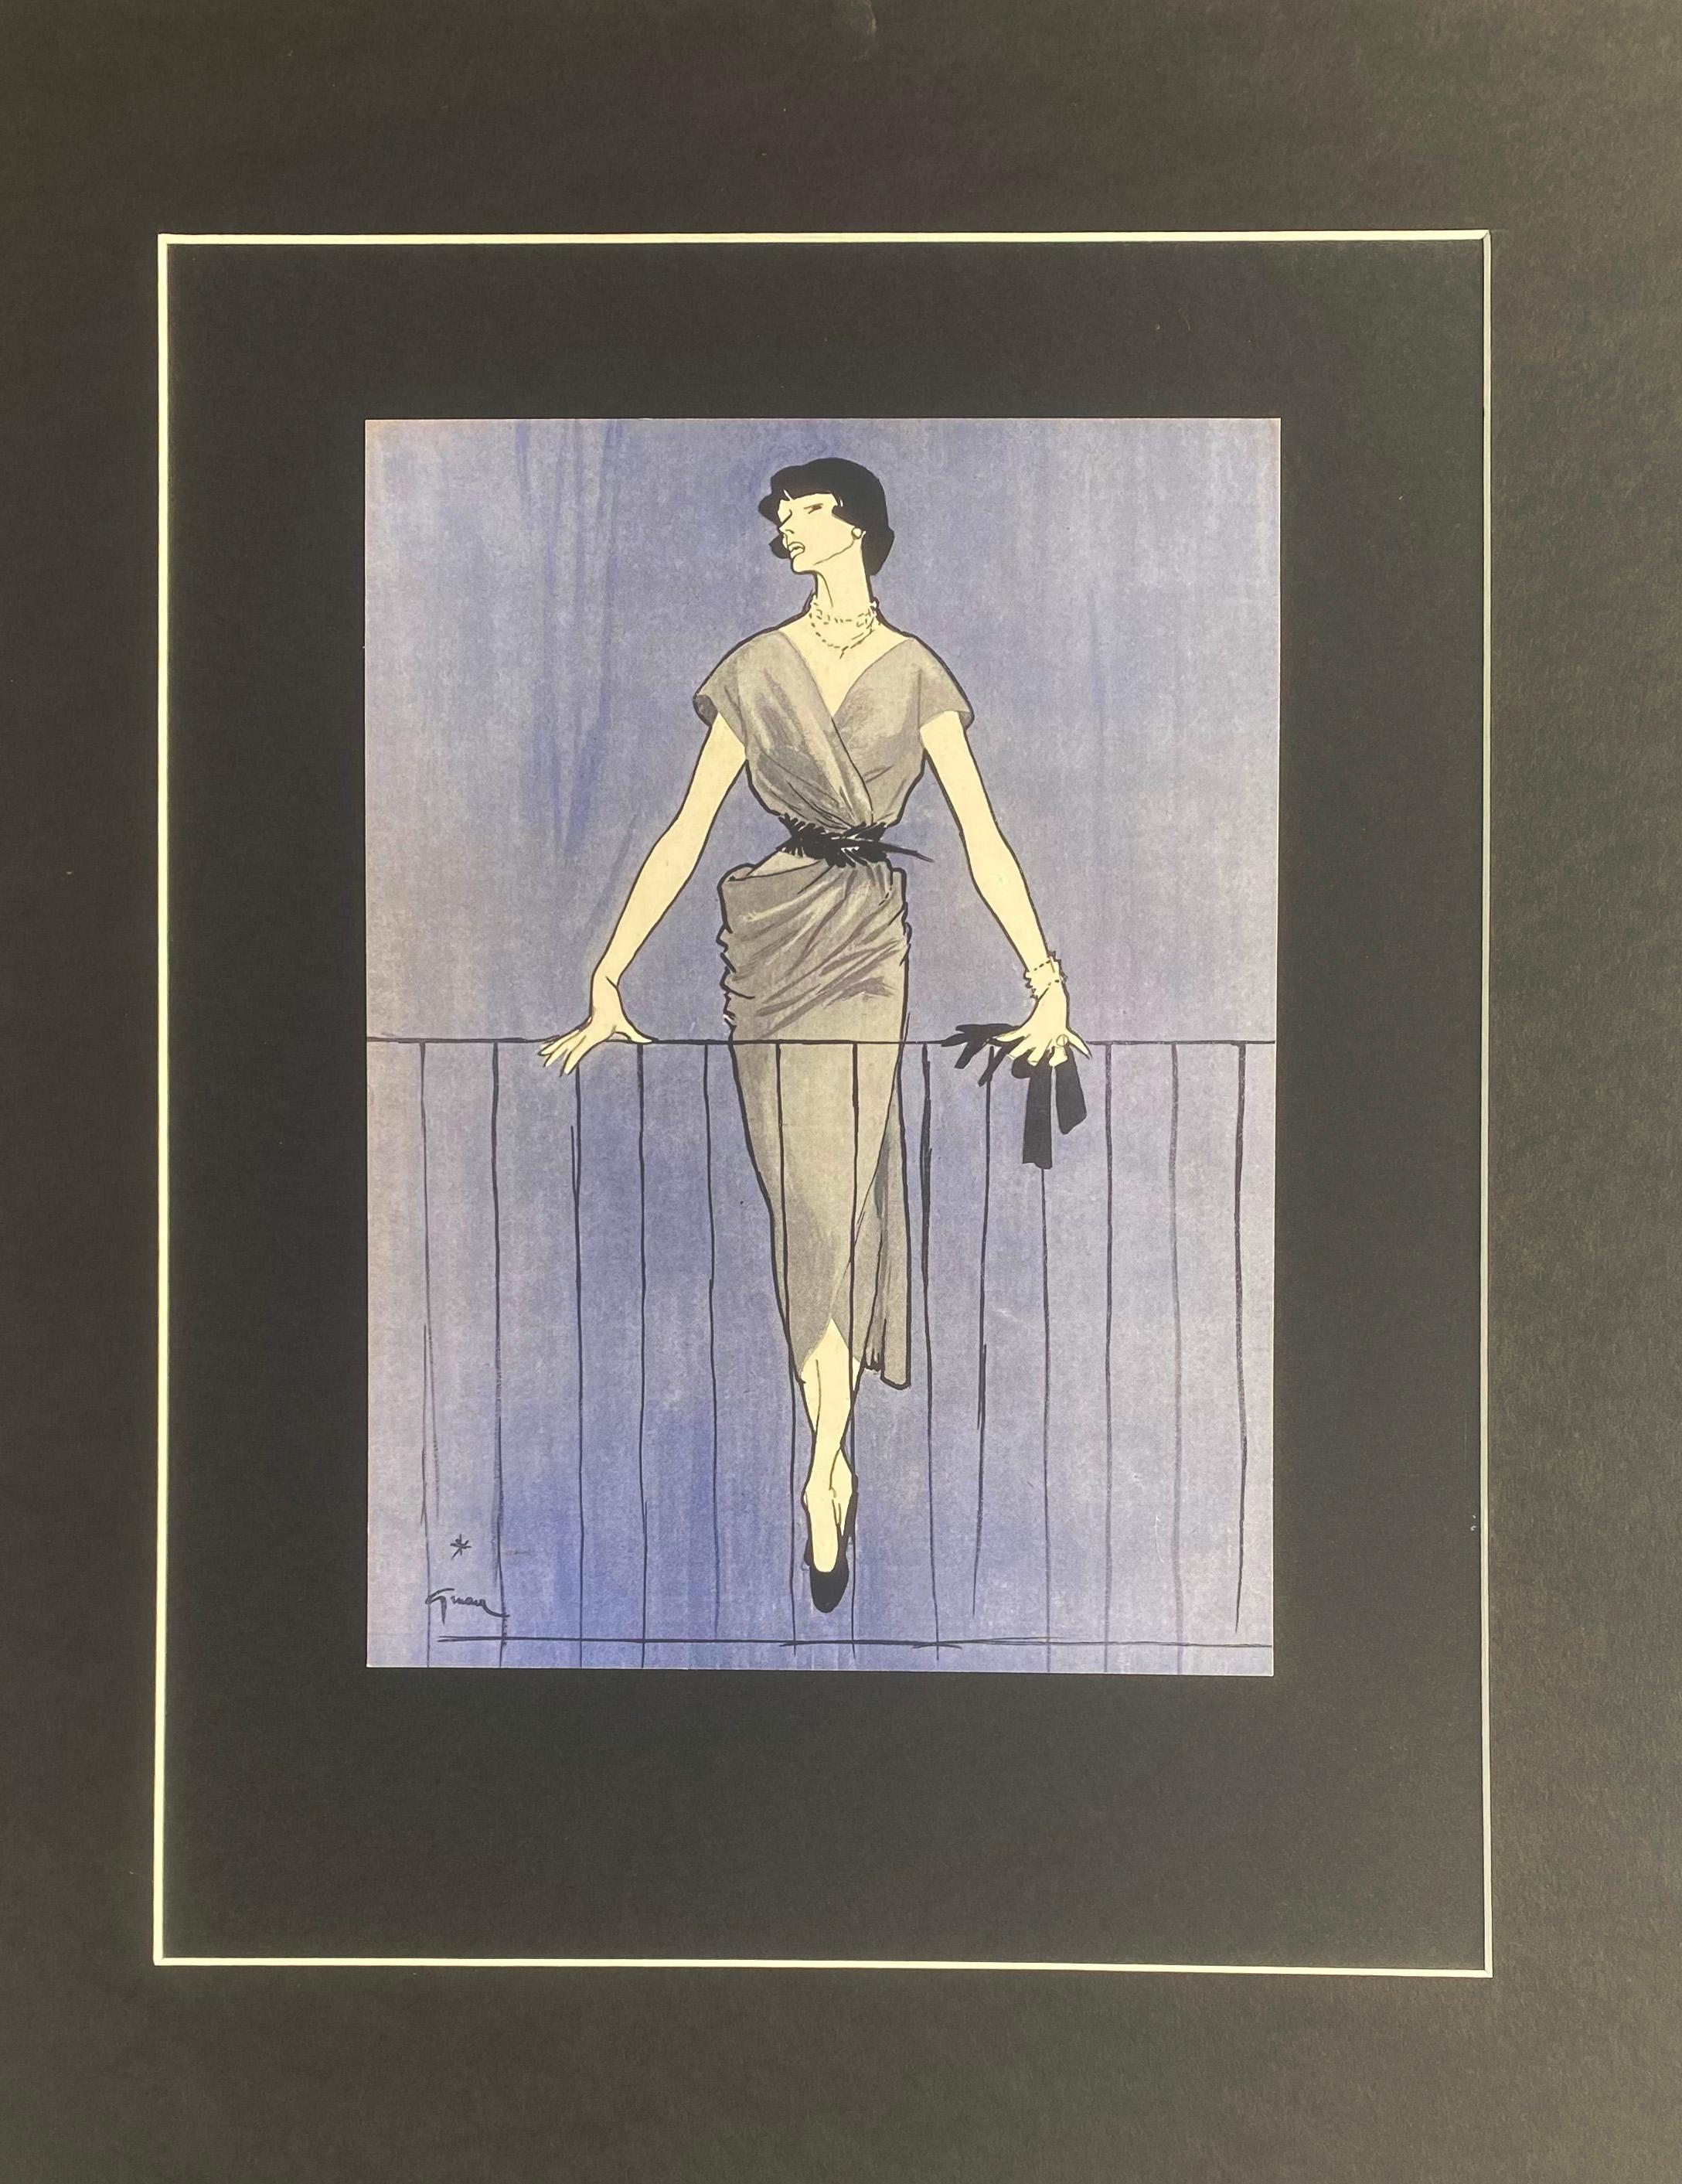 René Grau - Fashion illustration for Marcel Rochas
Signed and dated on the back right
Original Print 
1948
Size with frame : 50cm x 35cm 
Size without frame : 28,5cm x 20cm
350€.